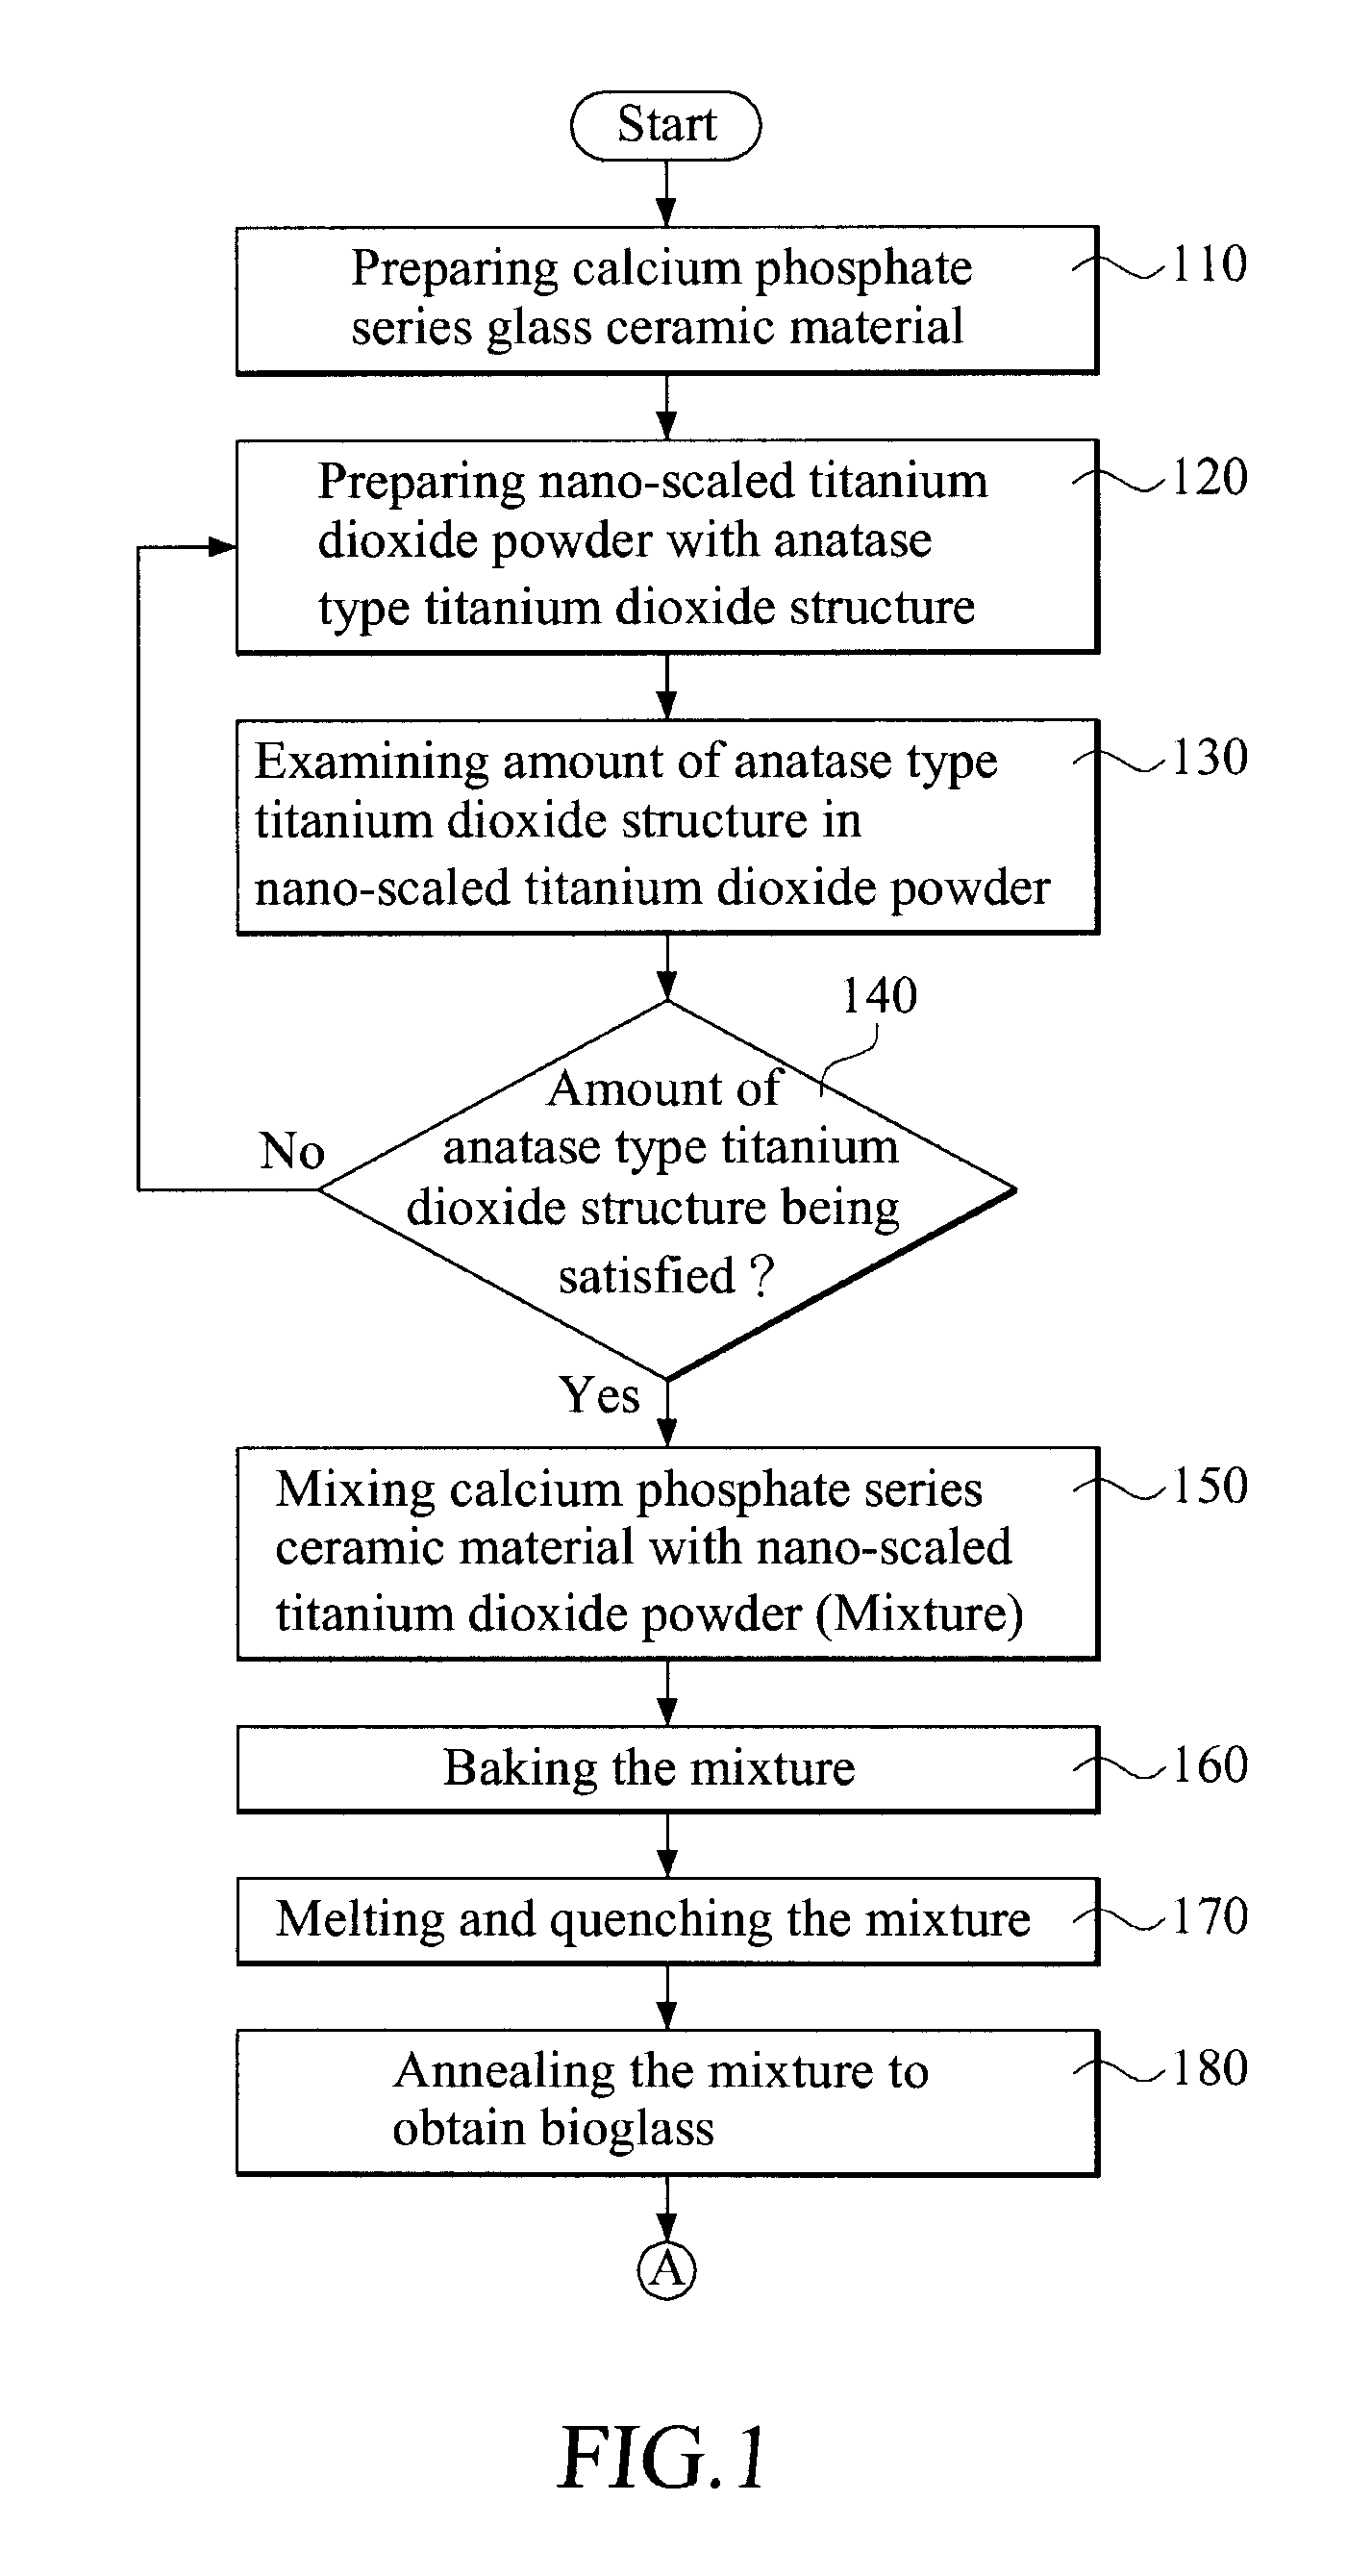 Method for manufacturing a bioactive glass ceramic material